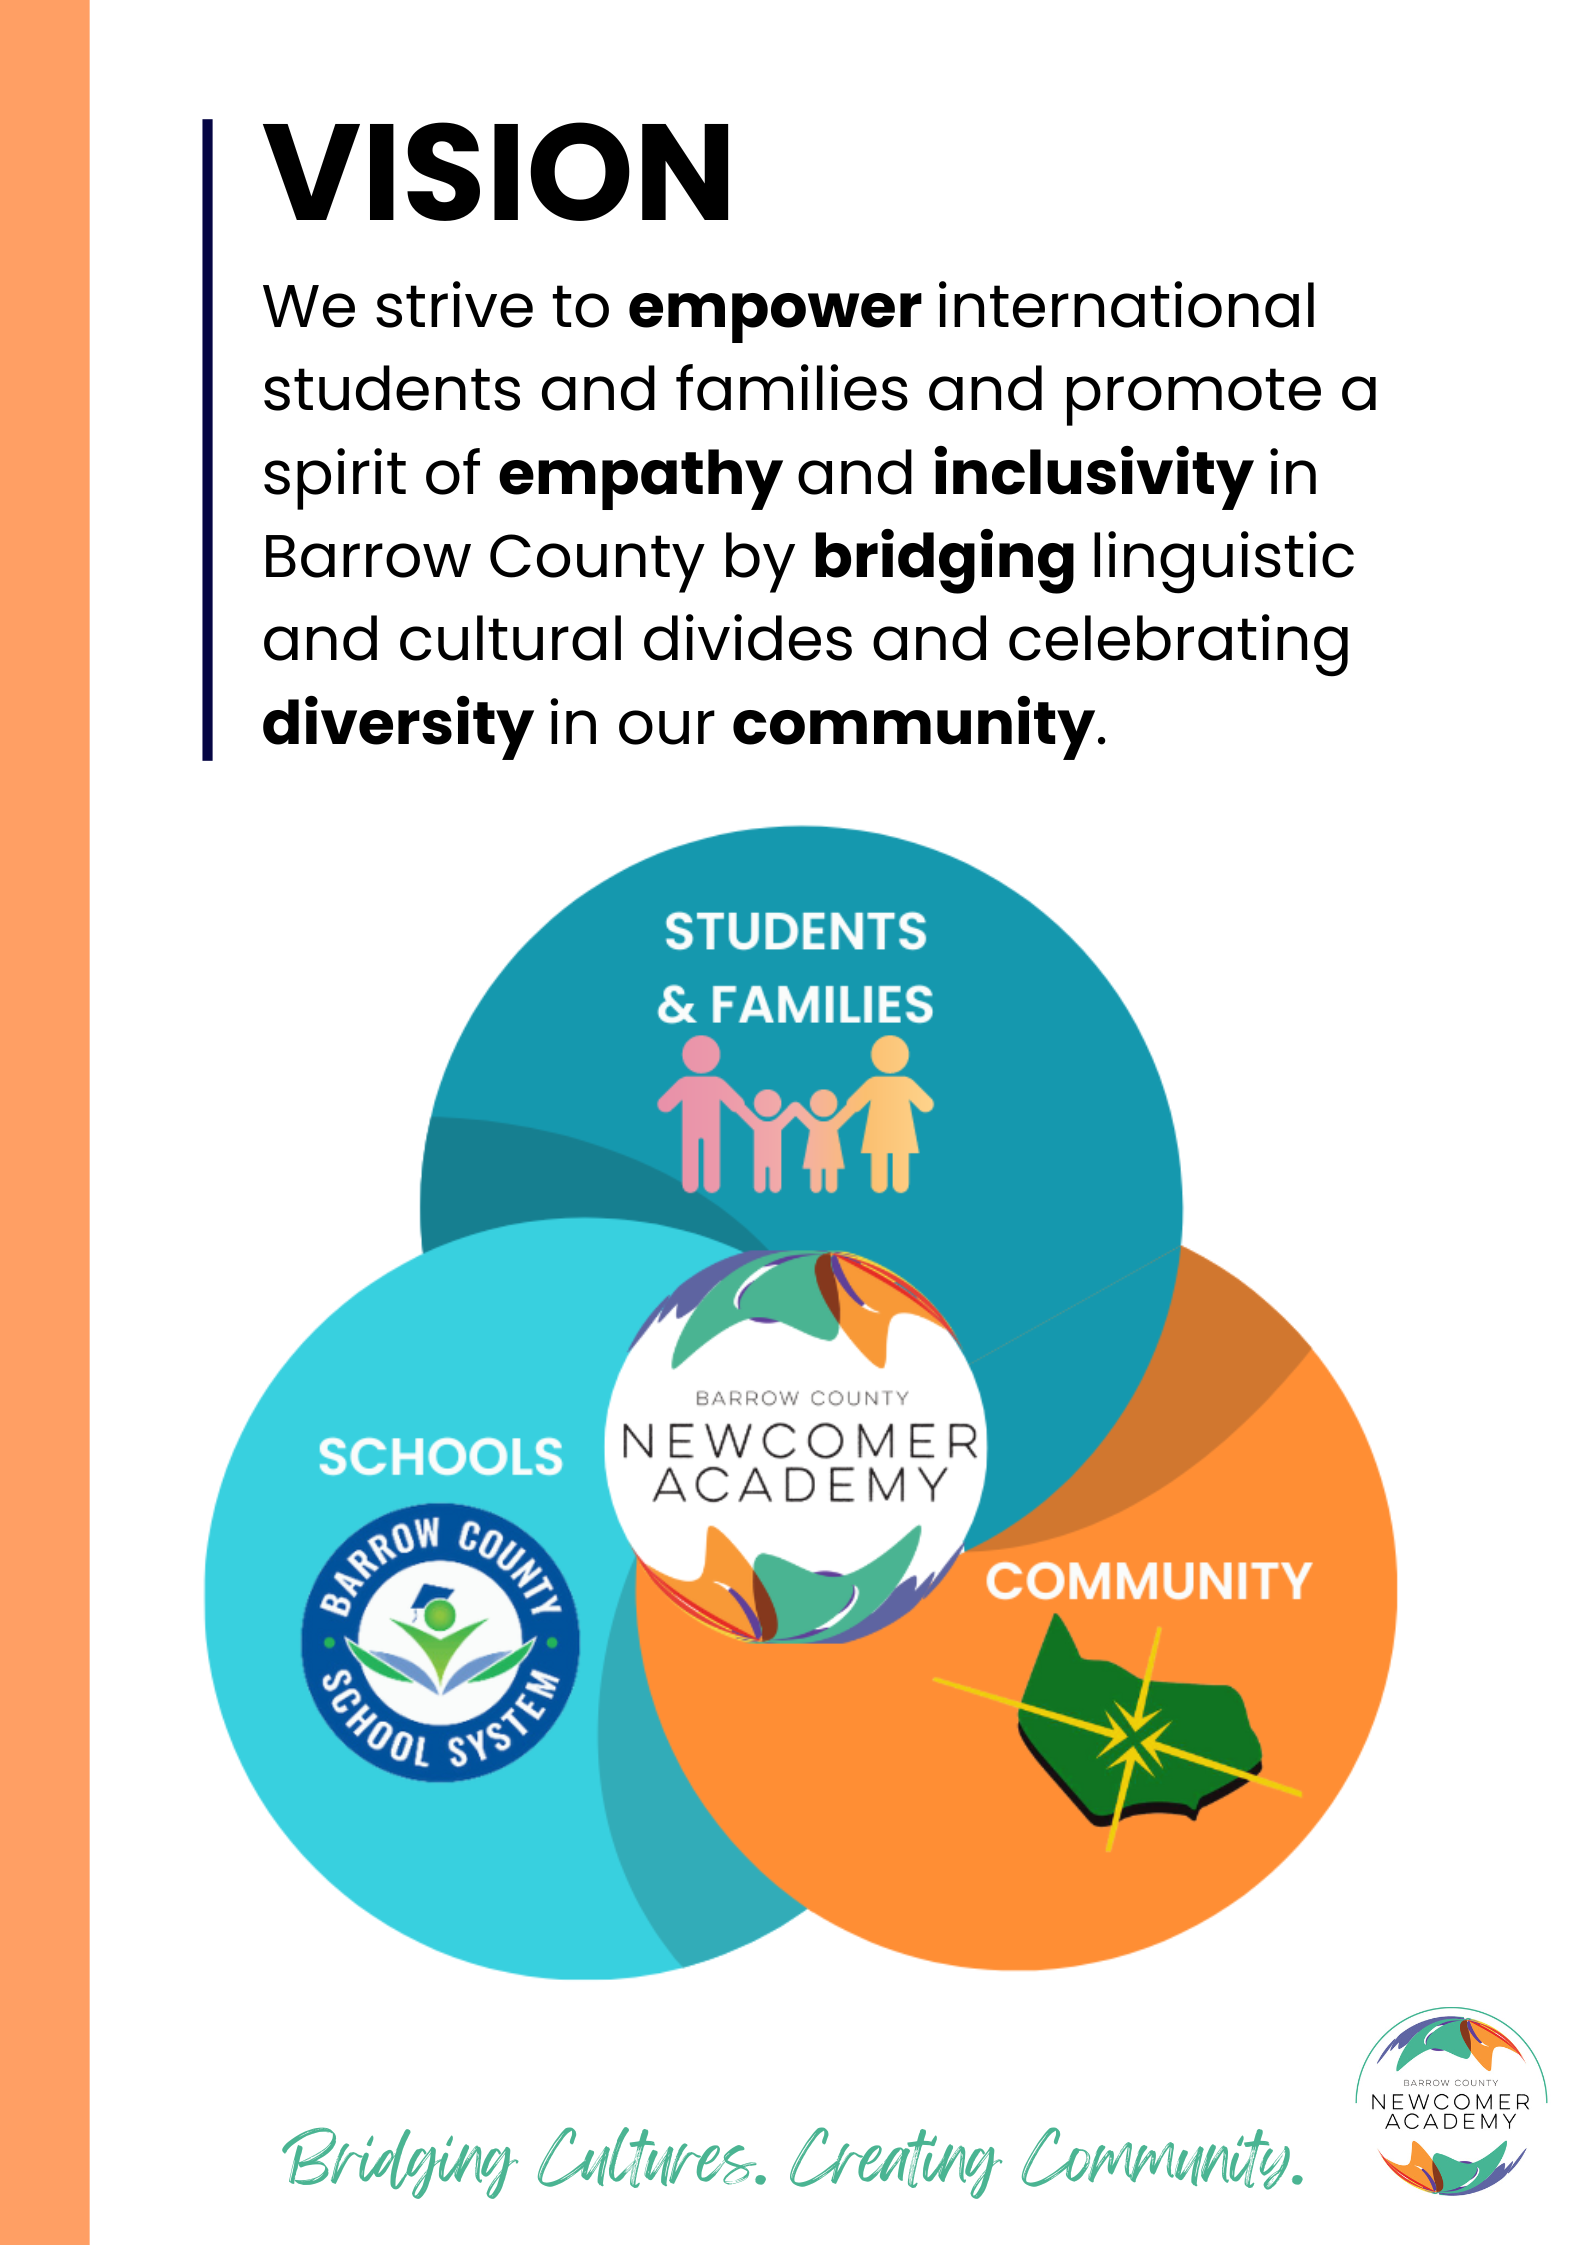 Newcomer Academy Vision: We strive to empower international students and families and promote a spirit of empathy and inclusivity in Barrow County by bridging linguistic and cultural divides and celebrating diversity in our community.